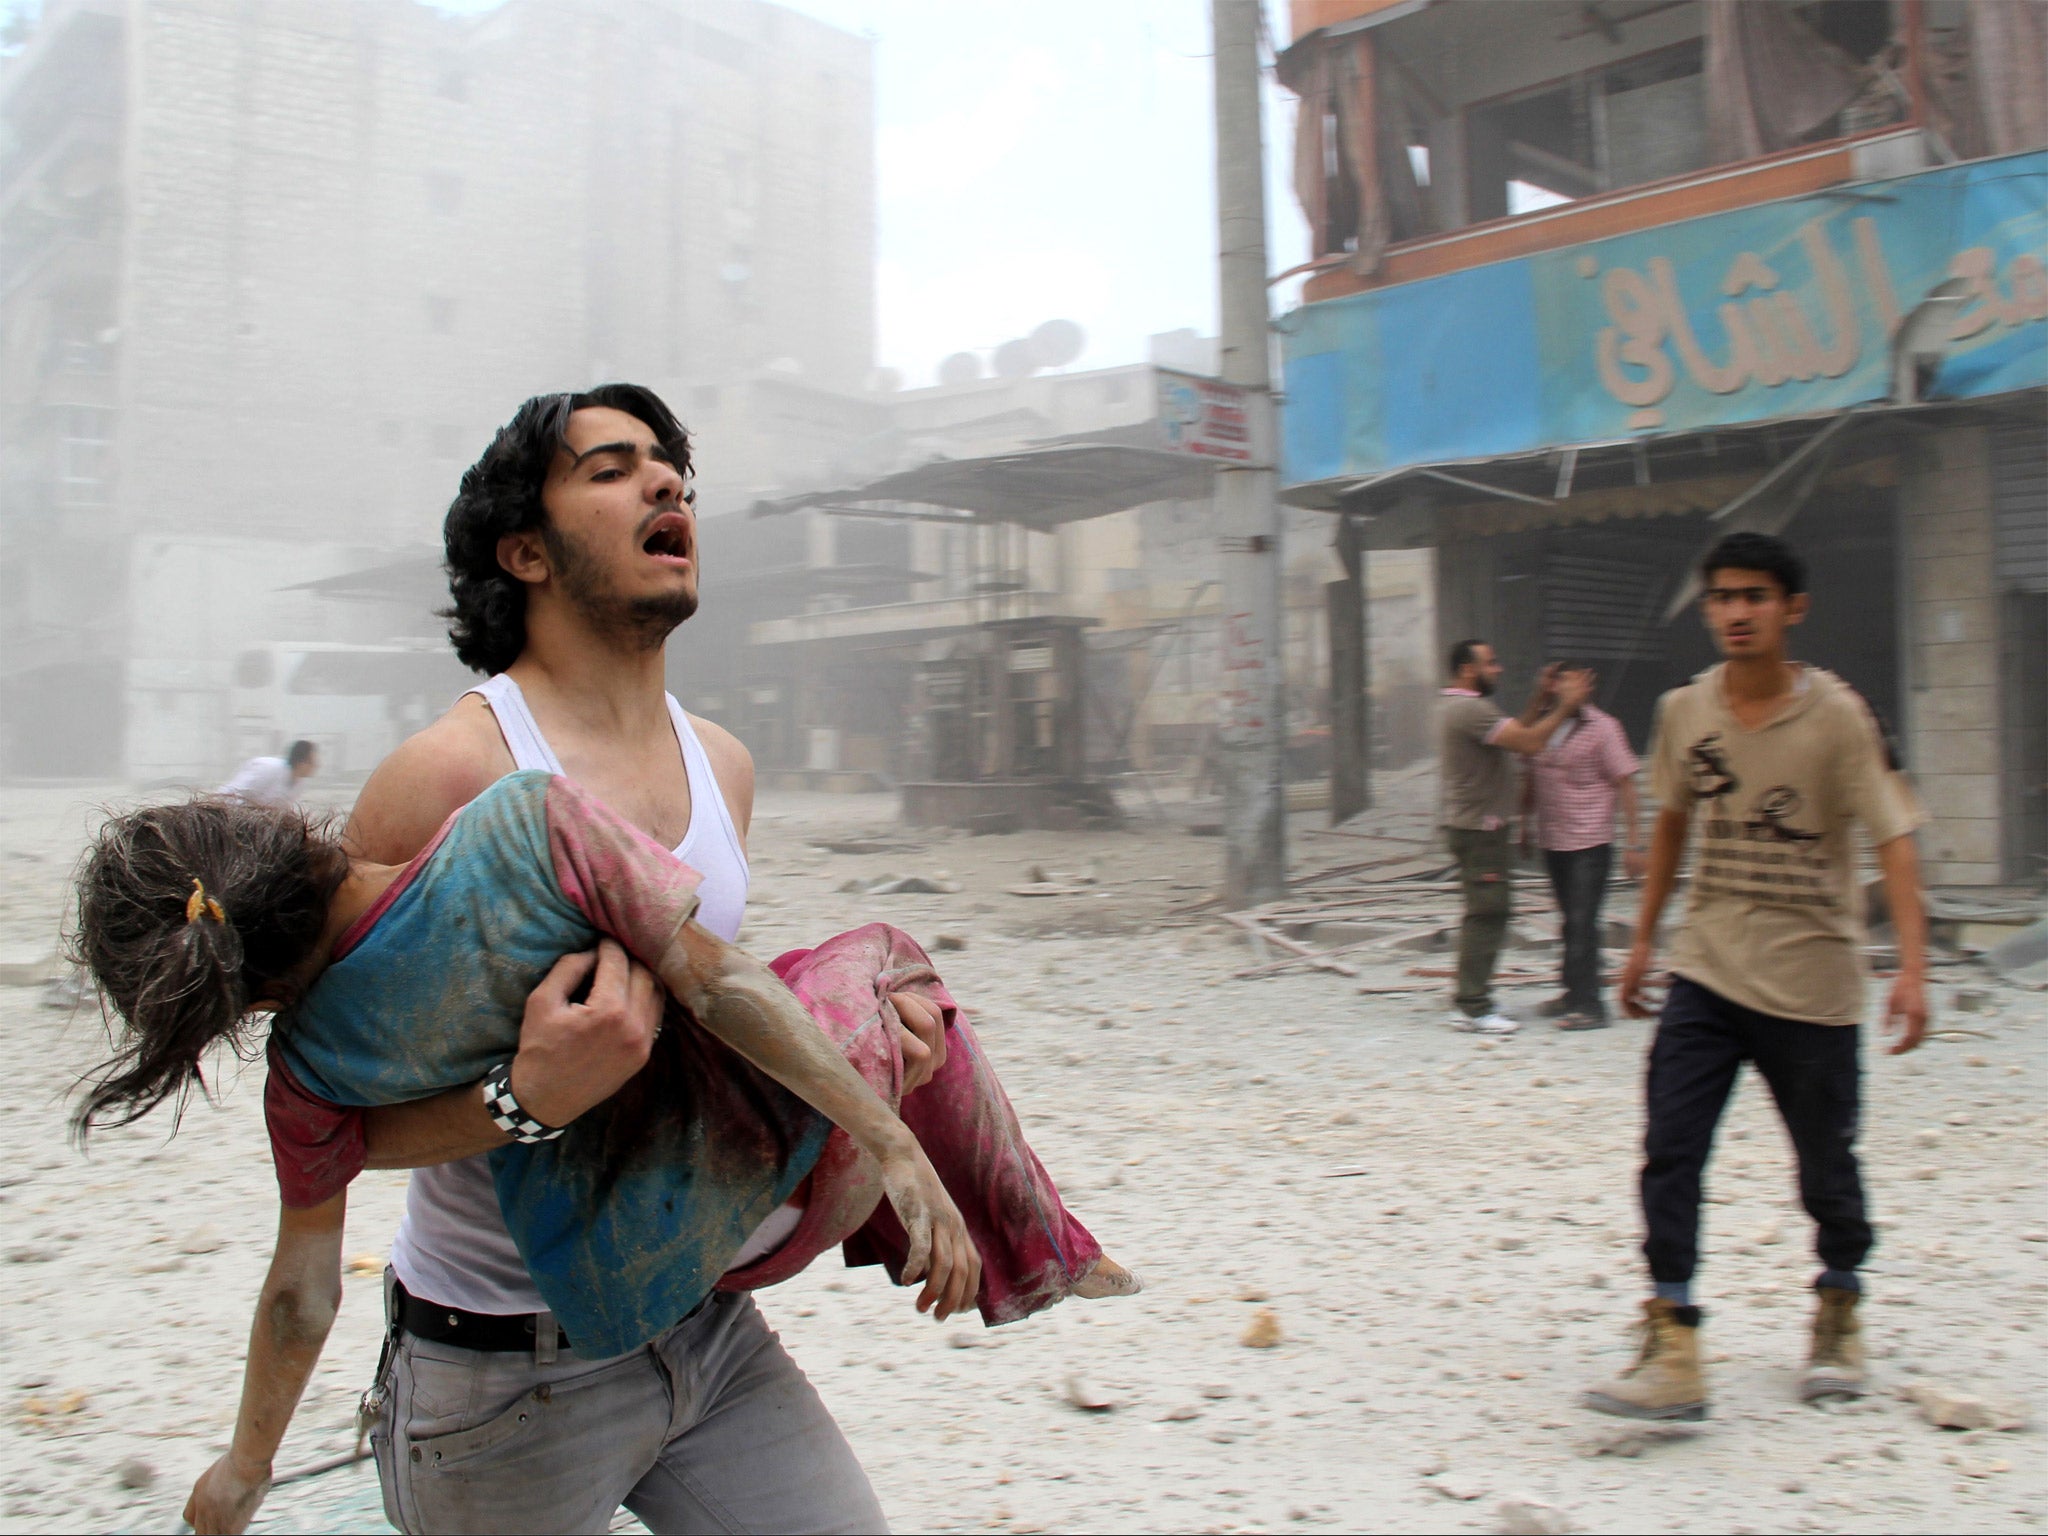 A man carrying a girl injured in a reported barrel-bomb attack by government forces in the northern city of Aleppo, on Tuesday